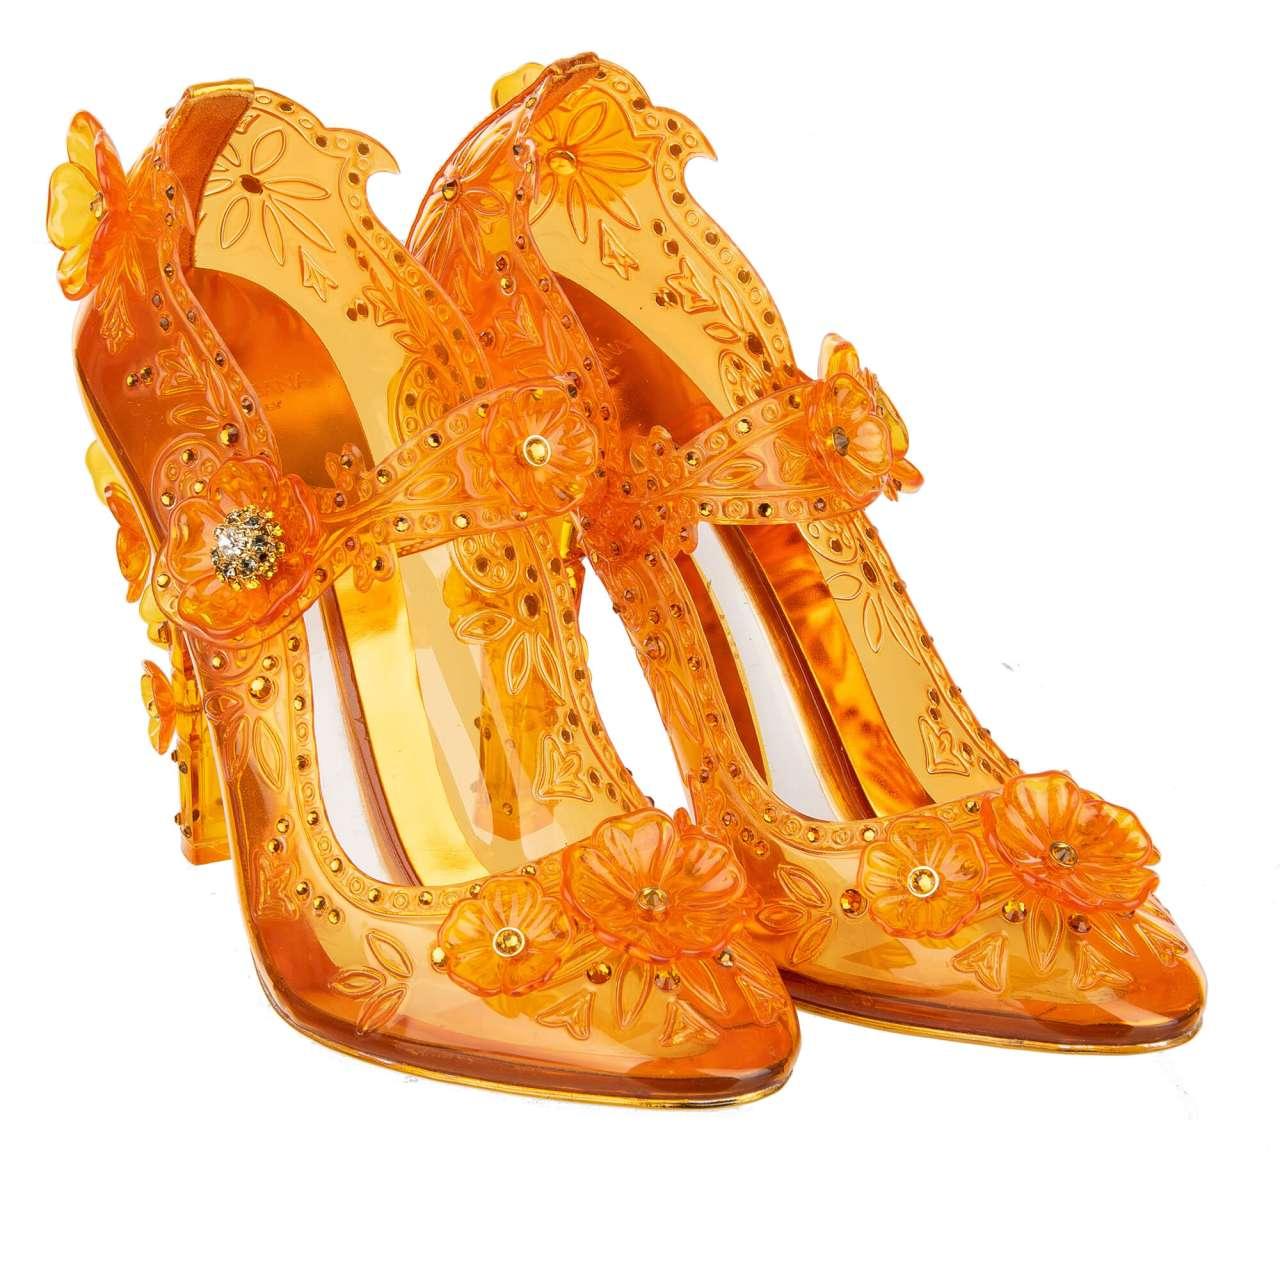 - Cinderella transparent Pumps made of PVC embellished with rhinestones and flowers in Orange by DOLCE & GABBANA  - RUNWAY - Dolce&Gabbana Fashion Show - Former RRP: EUR 1.150 - MADE IN ITALY - New with Box - Rhinestones embellishments - Model: